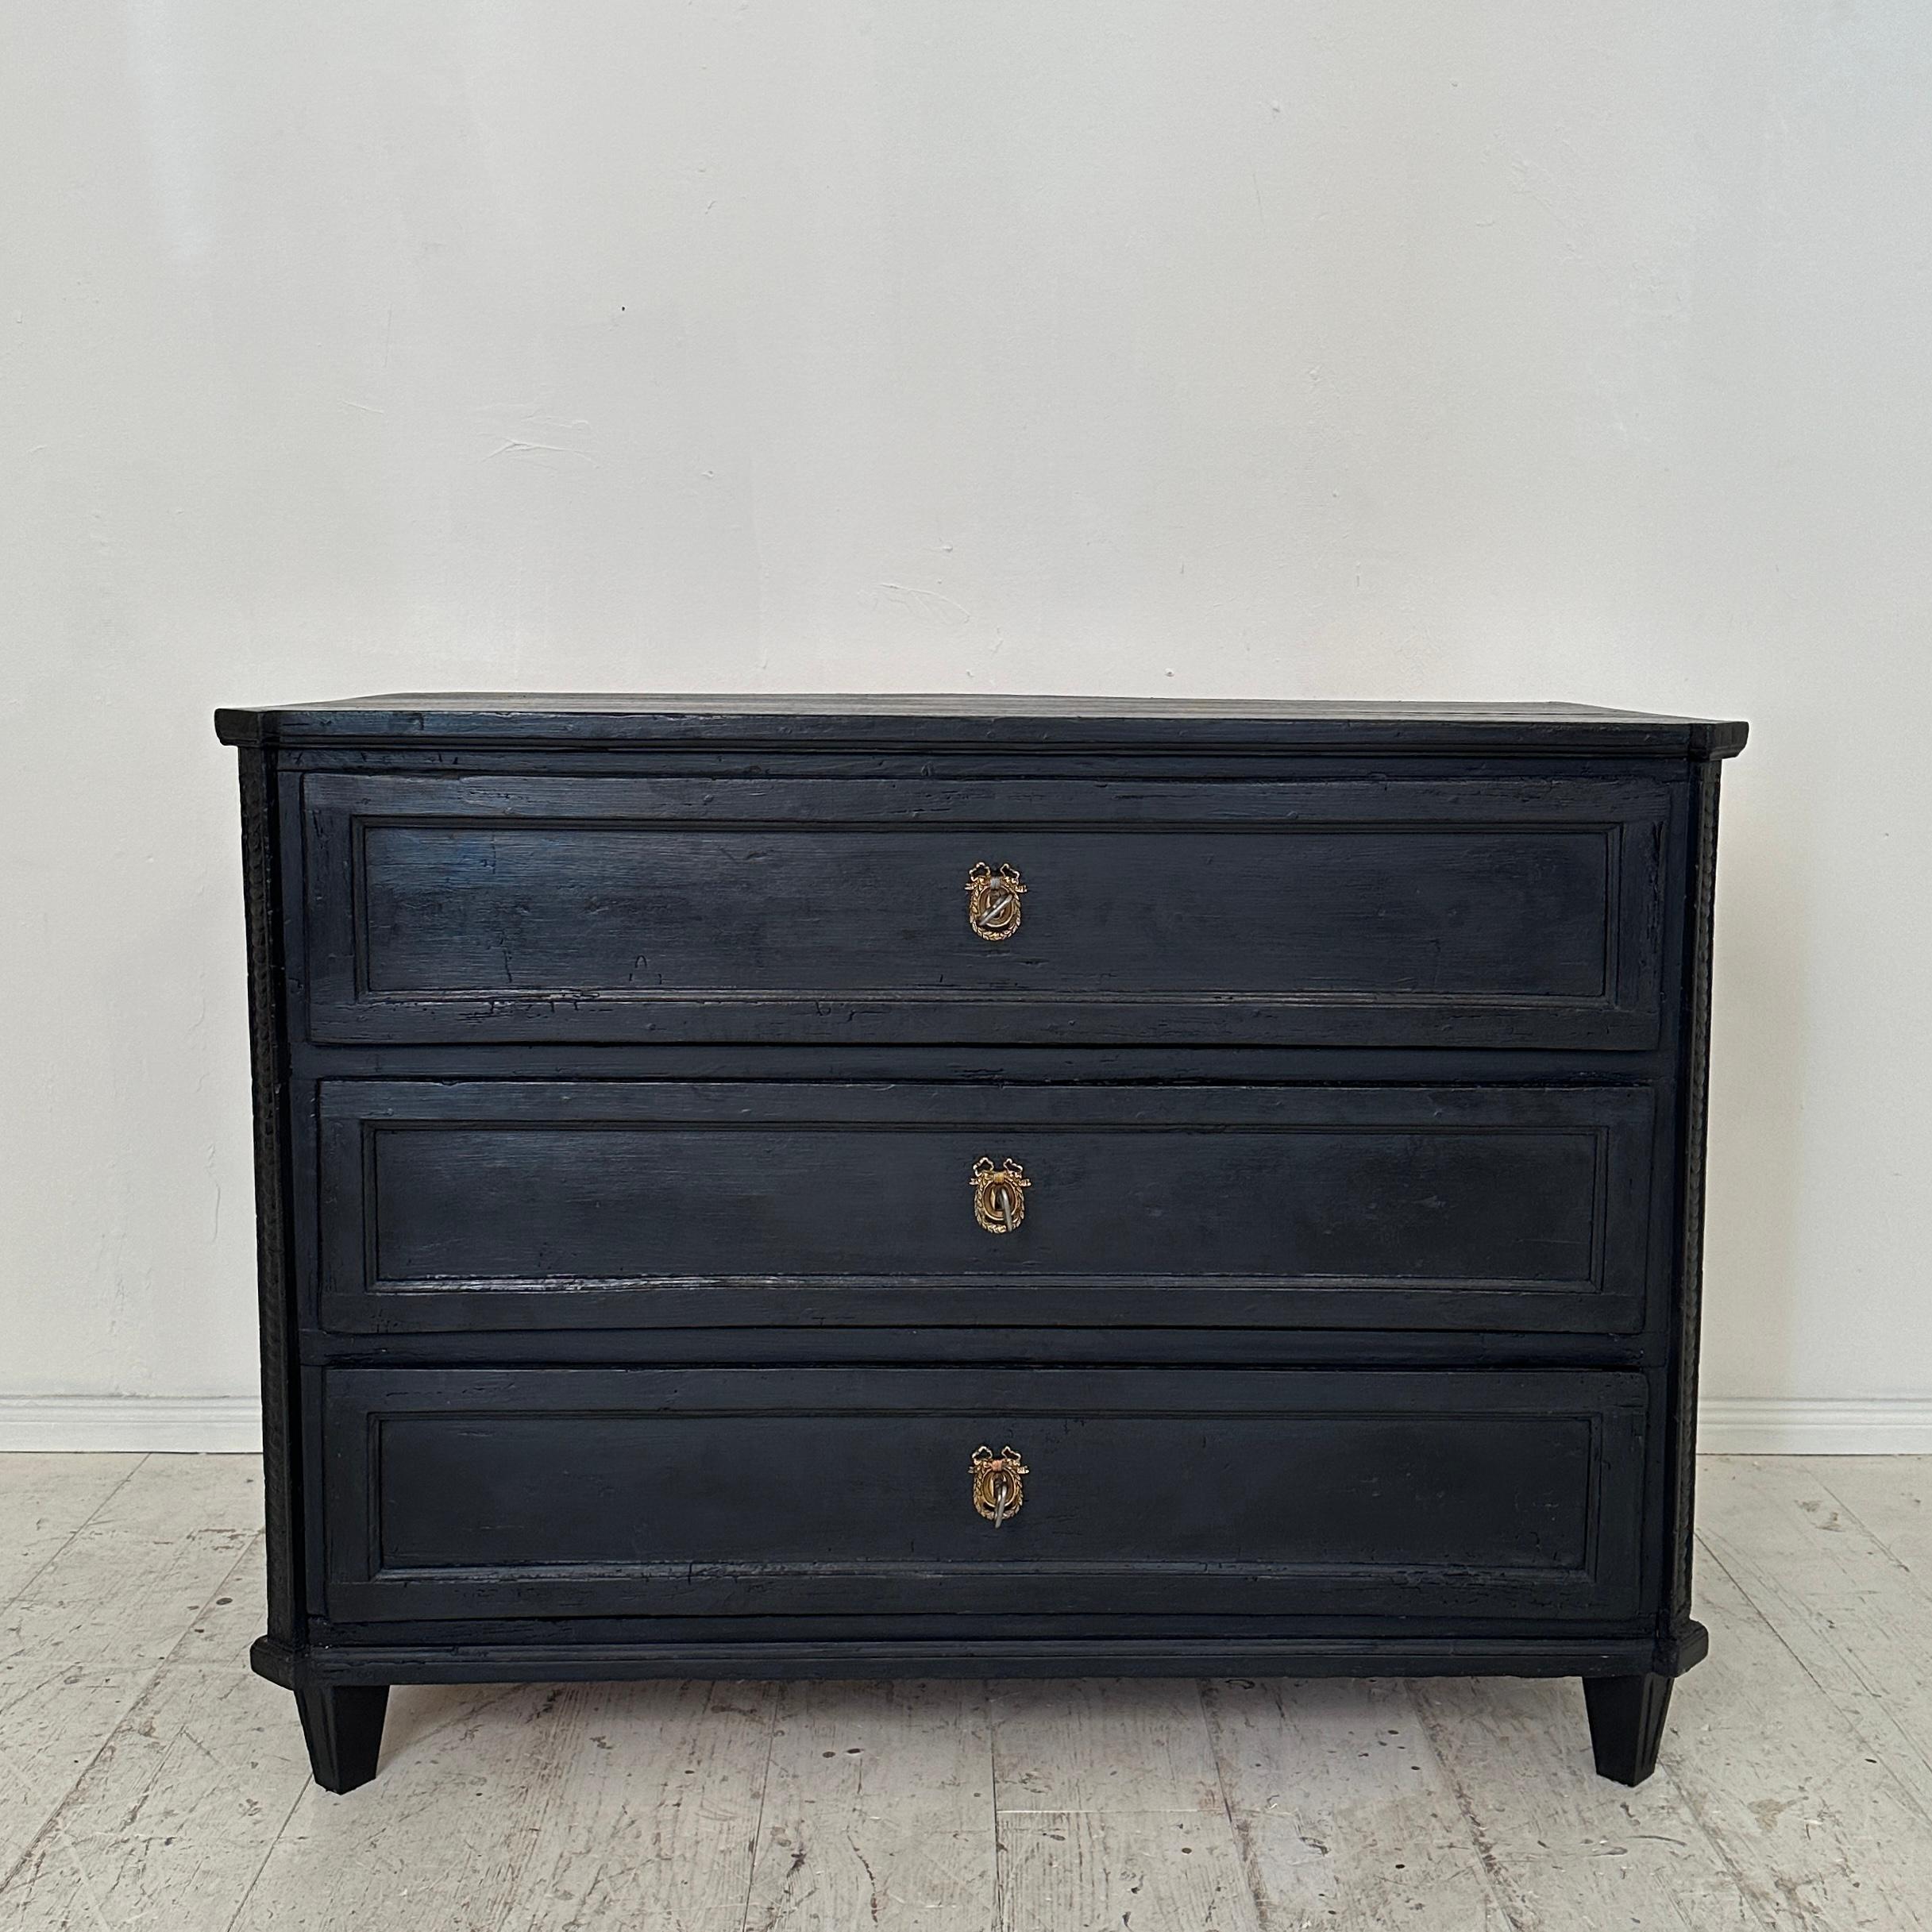 Crafted around 1800, the Early 19th Century Black Empire Chest of Drawers with Three Drawers embodies the opulence and grandeur of the Empire style. Made with meticulous craftsmanship, this chest exudes an air of regal sophistication. Its sleek